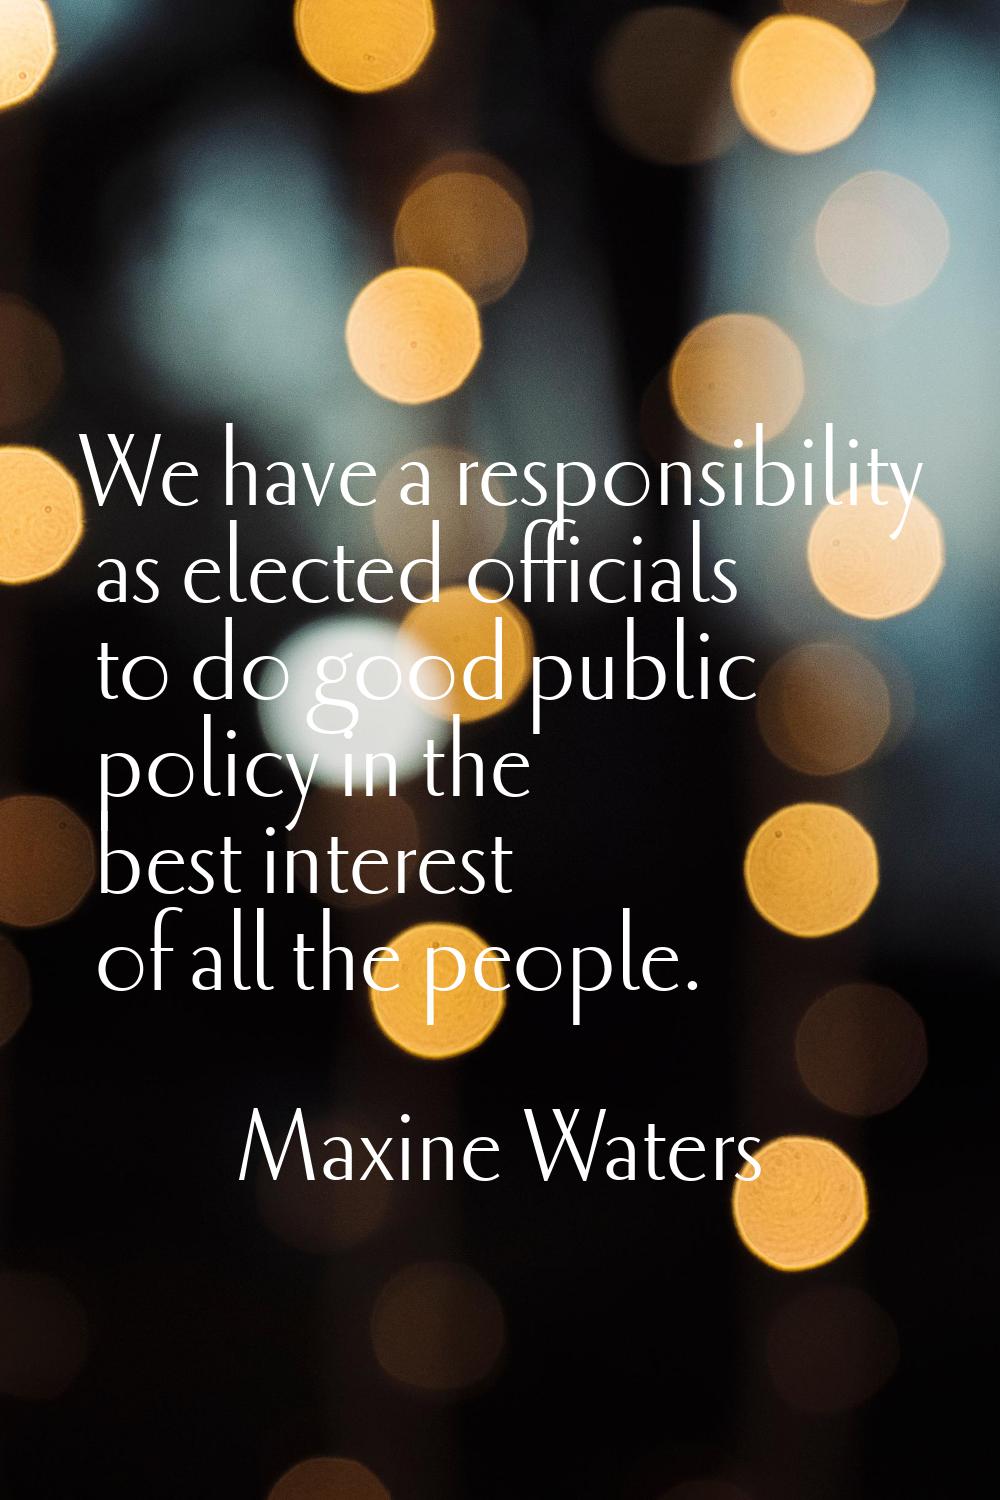 We have a responsibility as elected officials to do good public policy in the best interest of all 